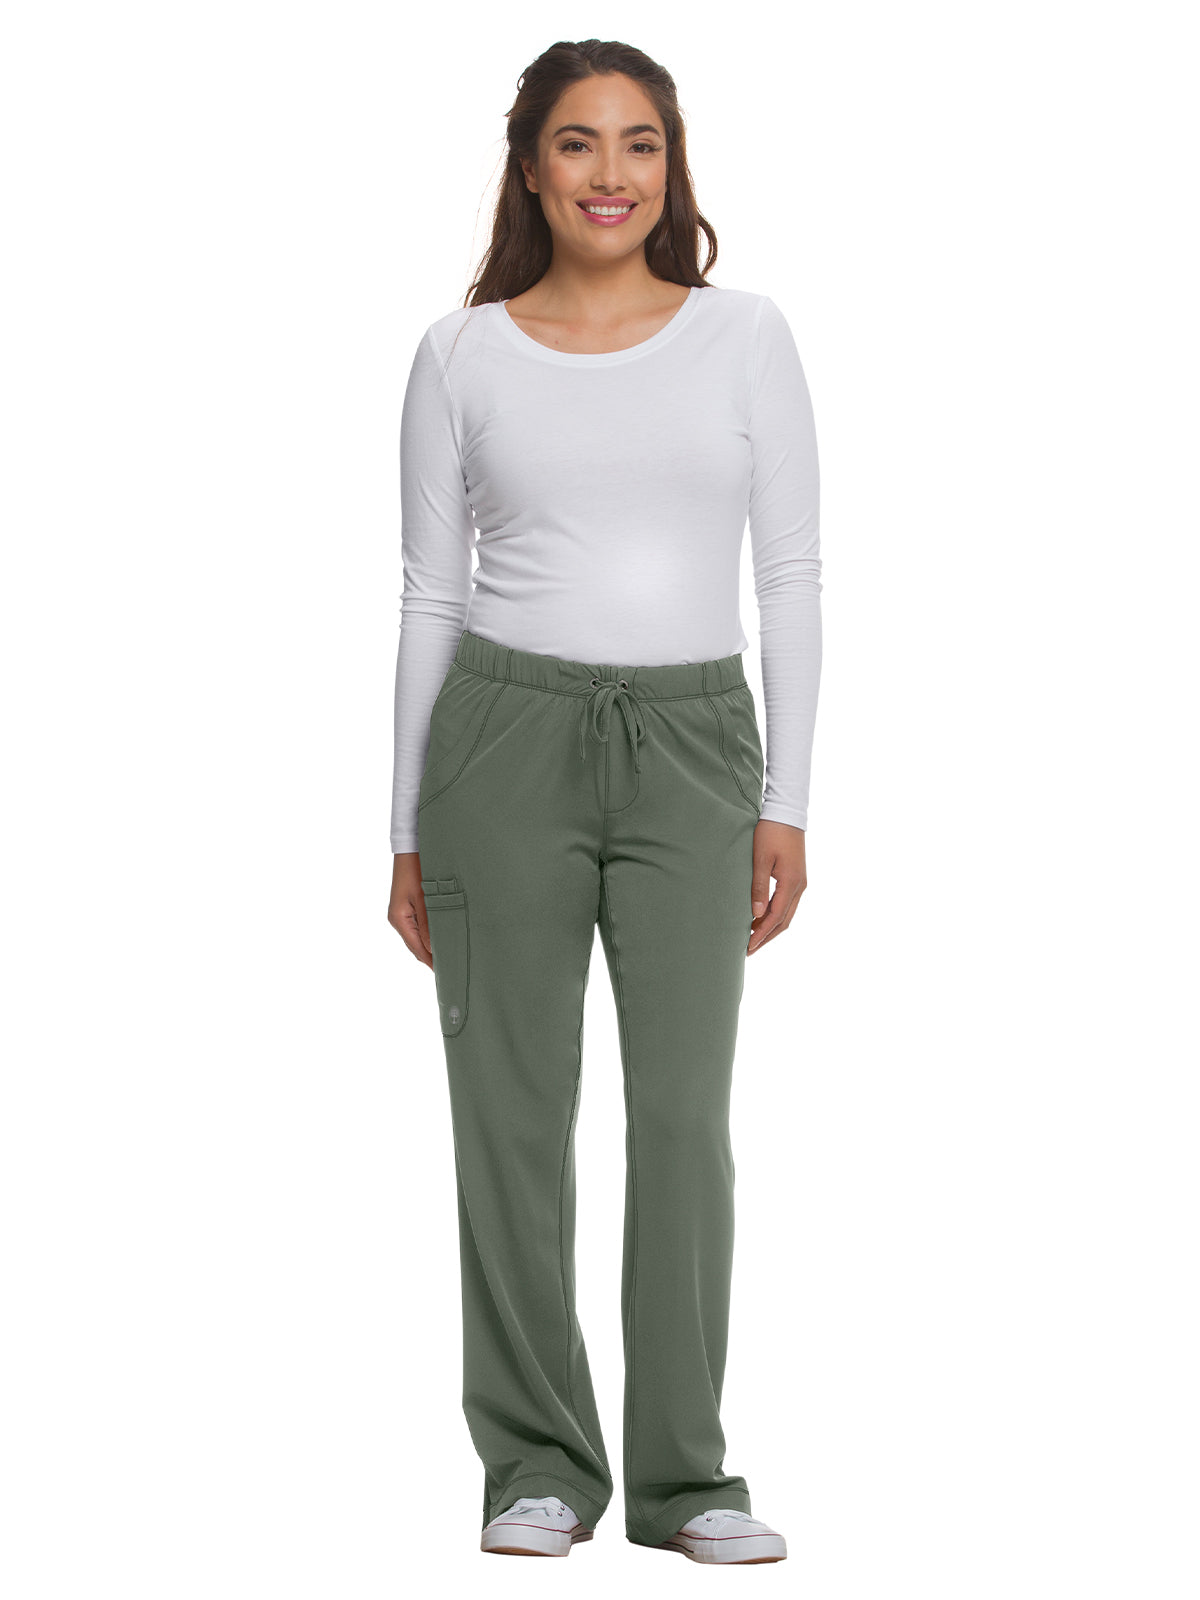 Women's Moisture Wicking Pant - 9560 - Olive